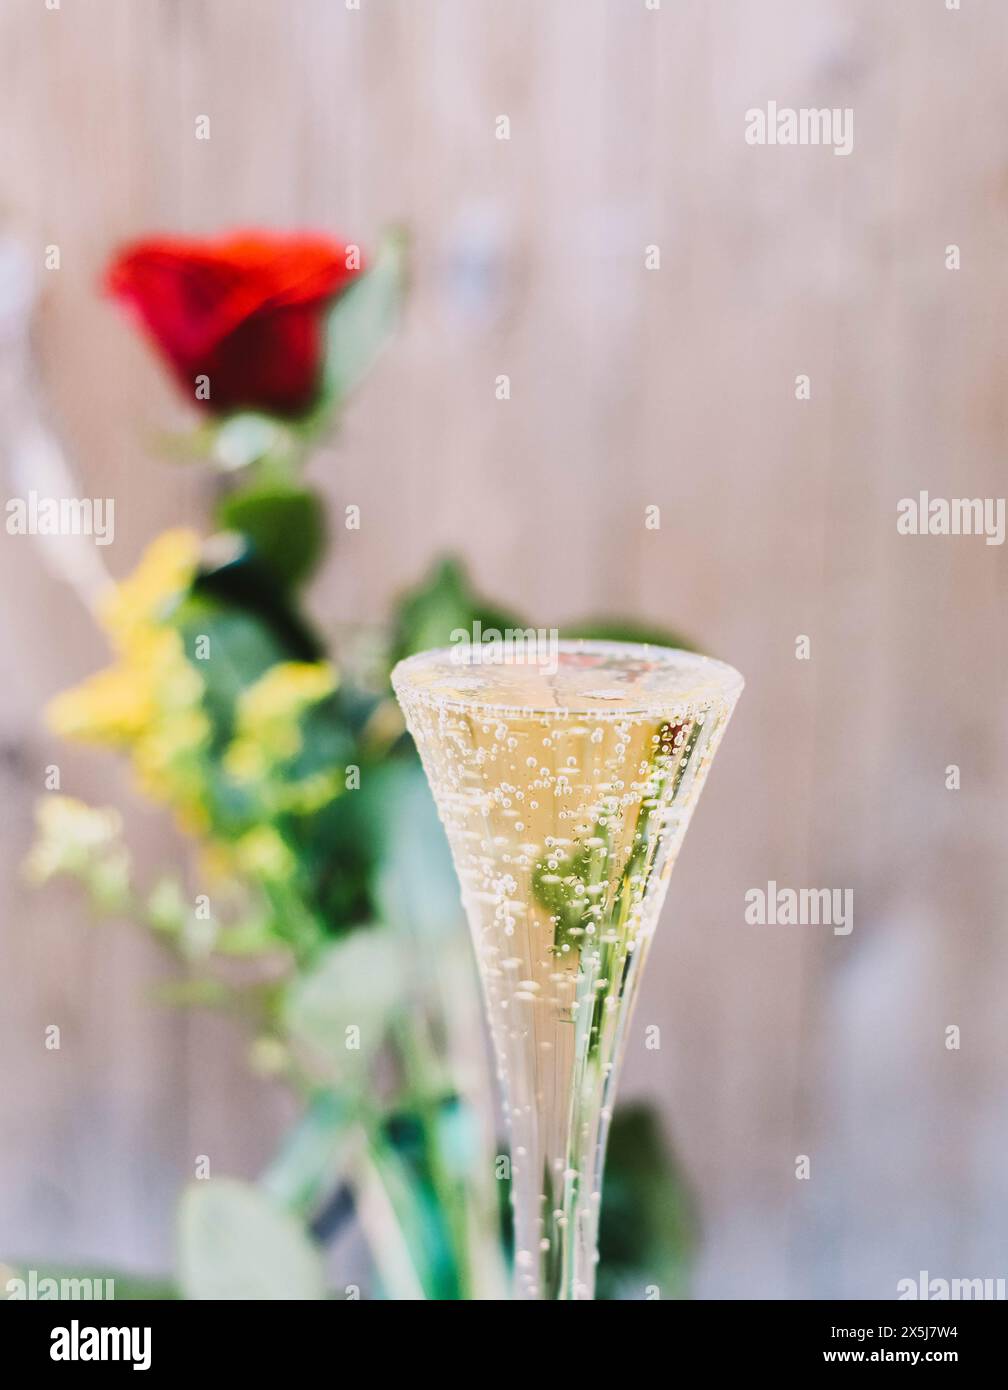 A red rose accompanied by a glass of champagne Stock Photo